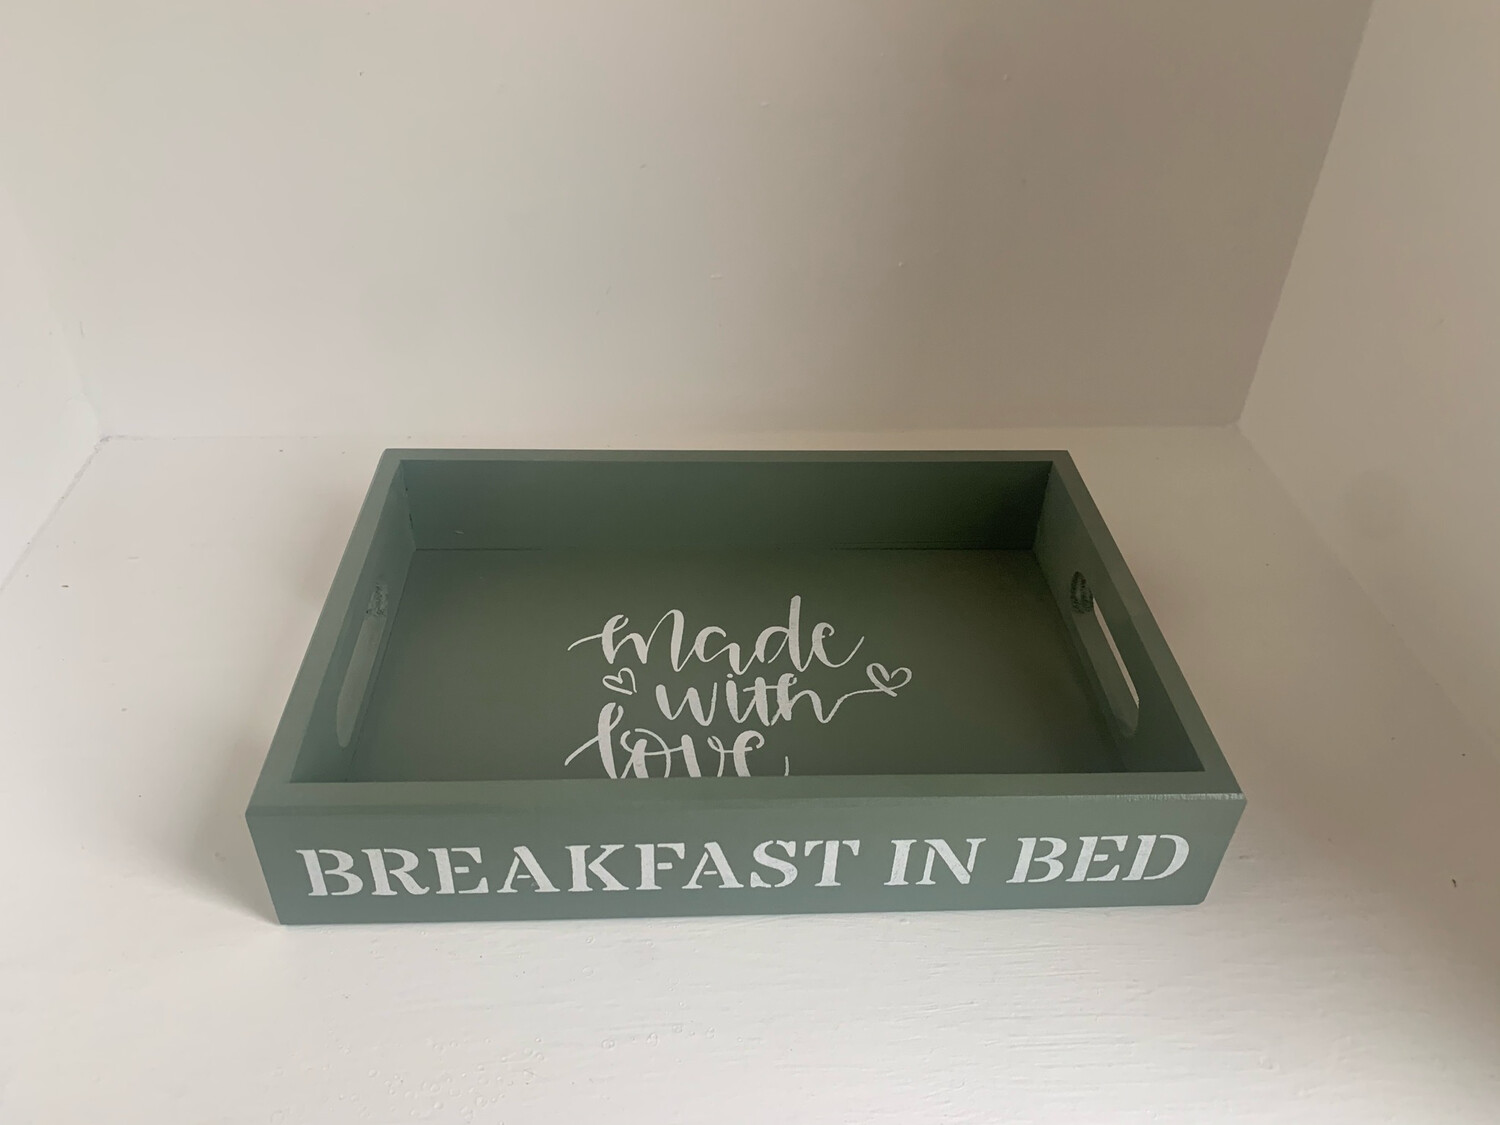 Breakfast in Bed decorative shabby chic wooden tray Free UK P&P